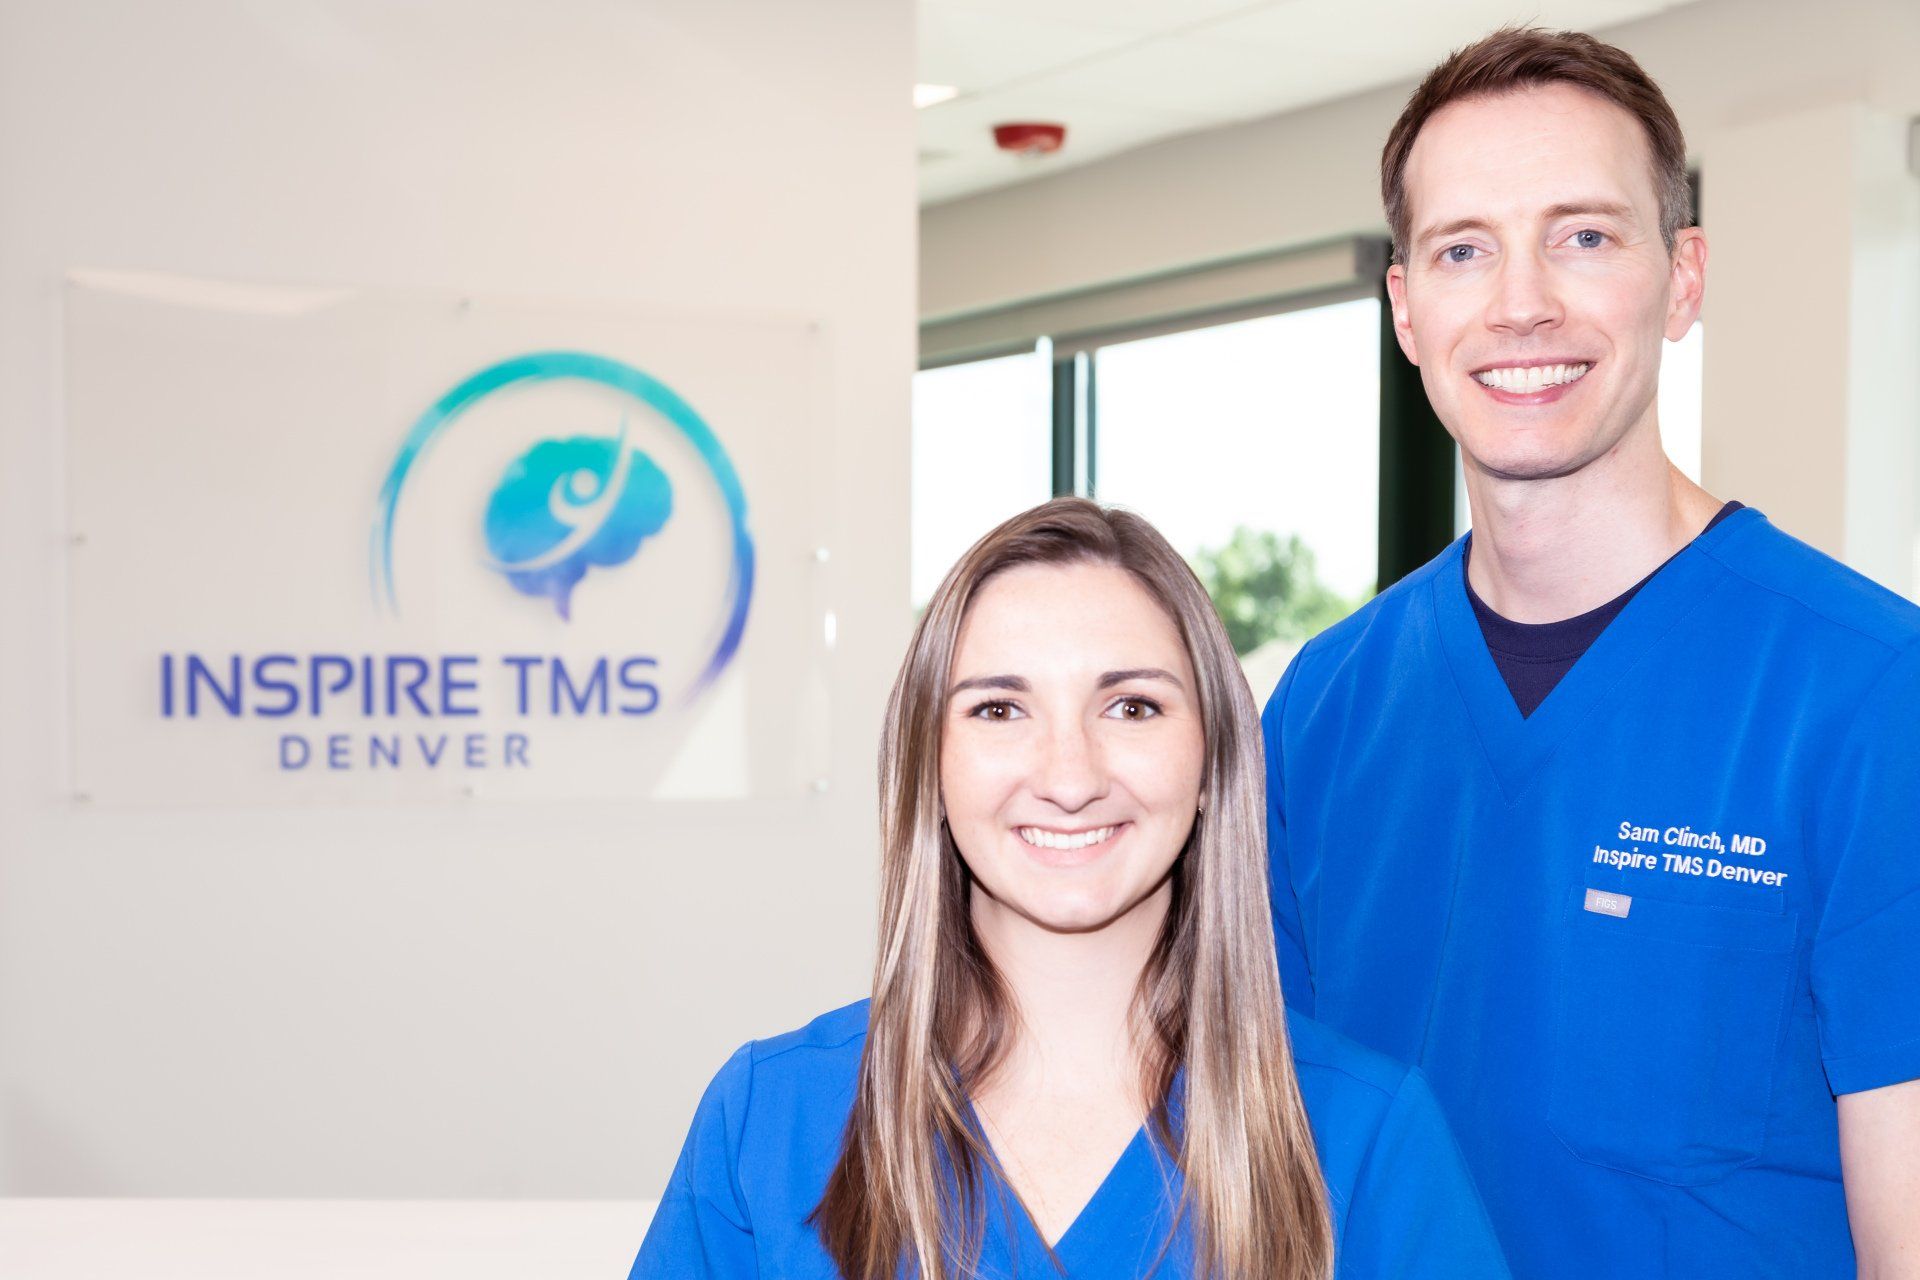 a man and a woman standing in front of a sign that says inspire tms denver